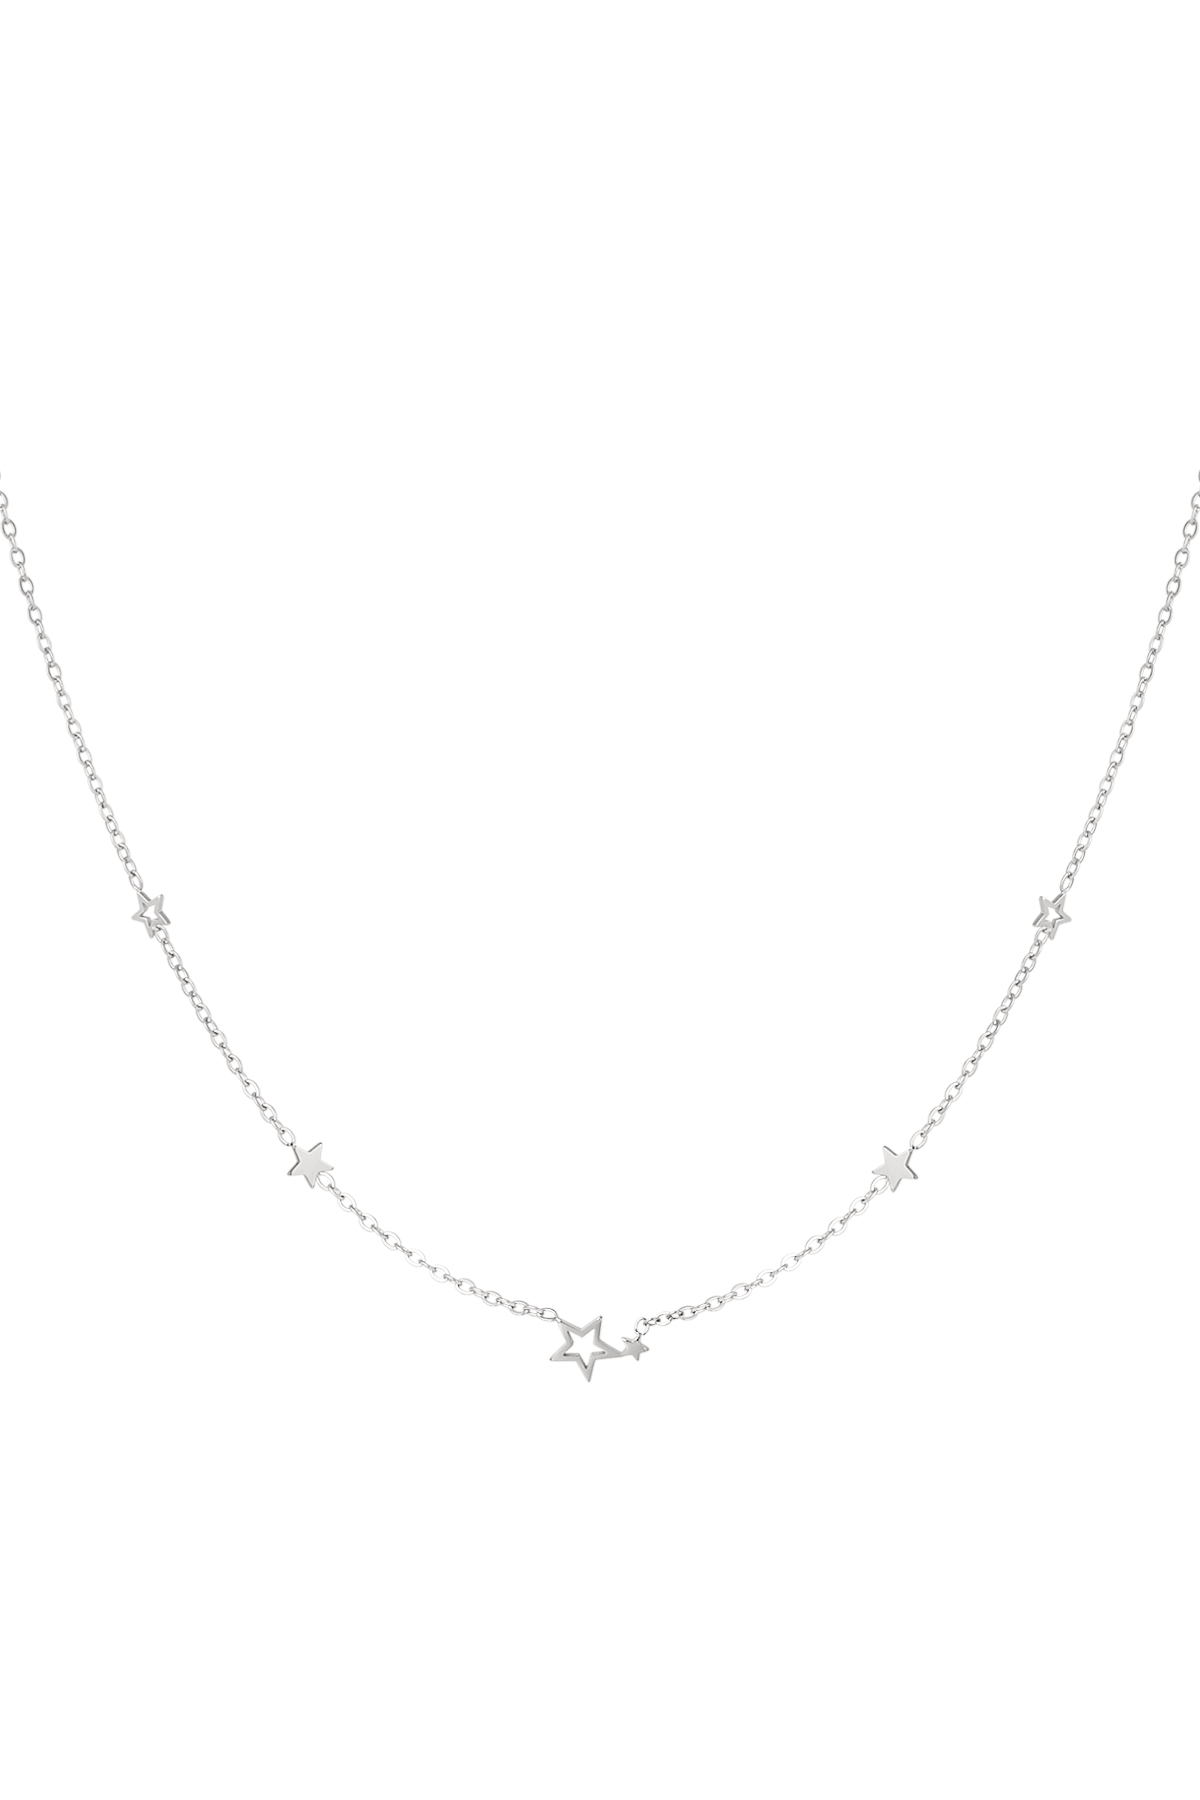 Necklace stainless steel stars - silver h5 